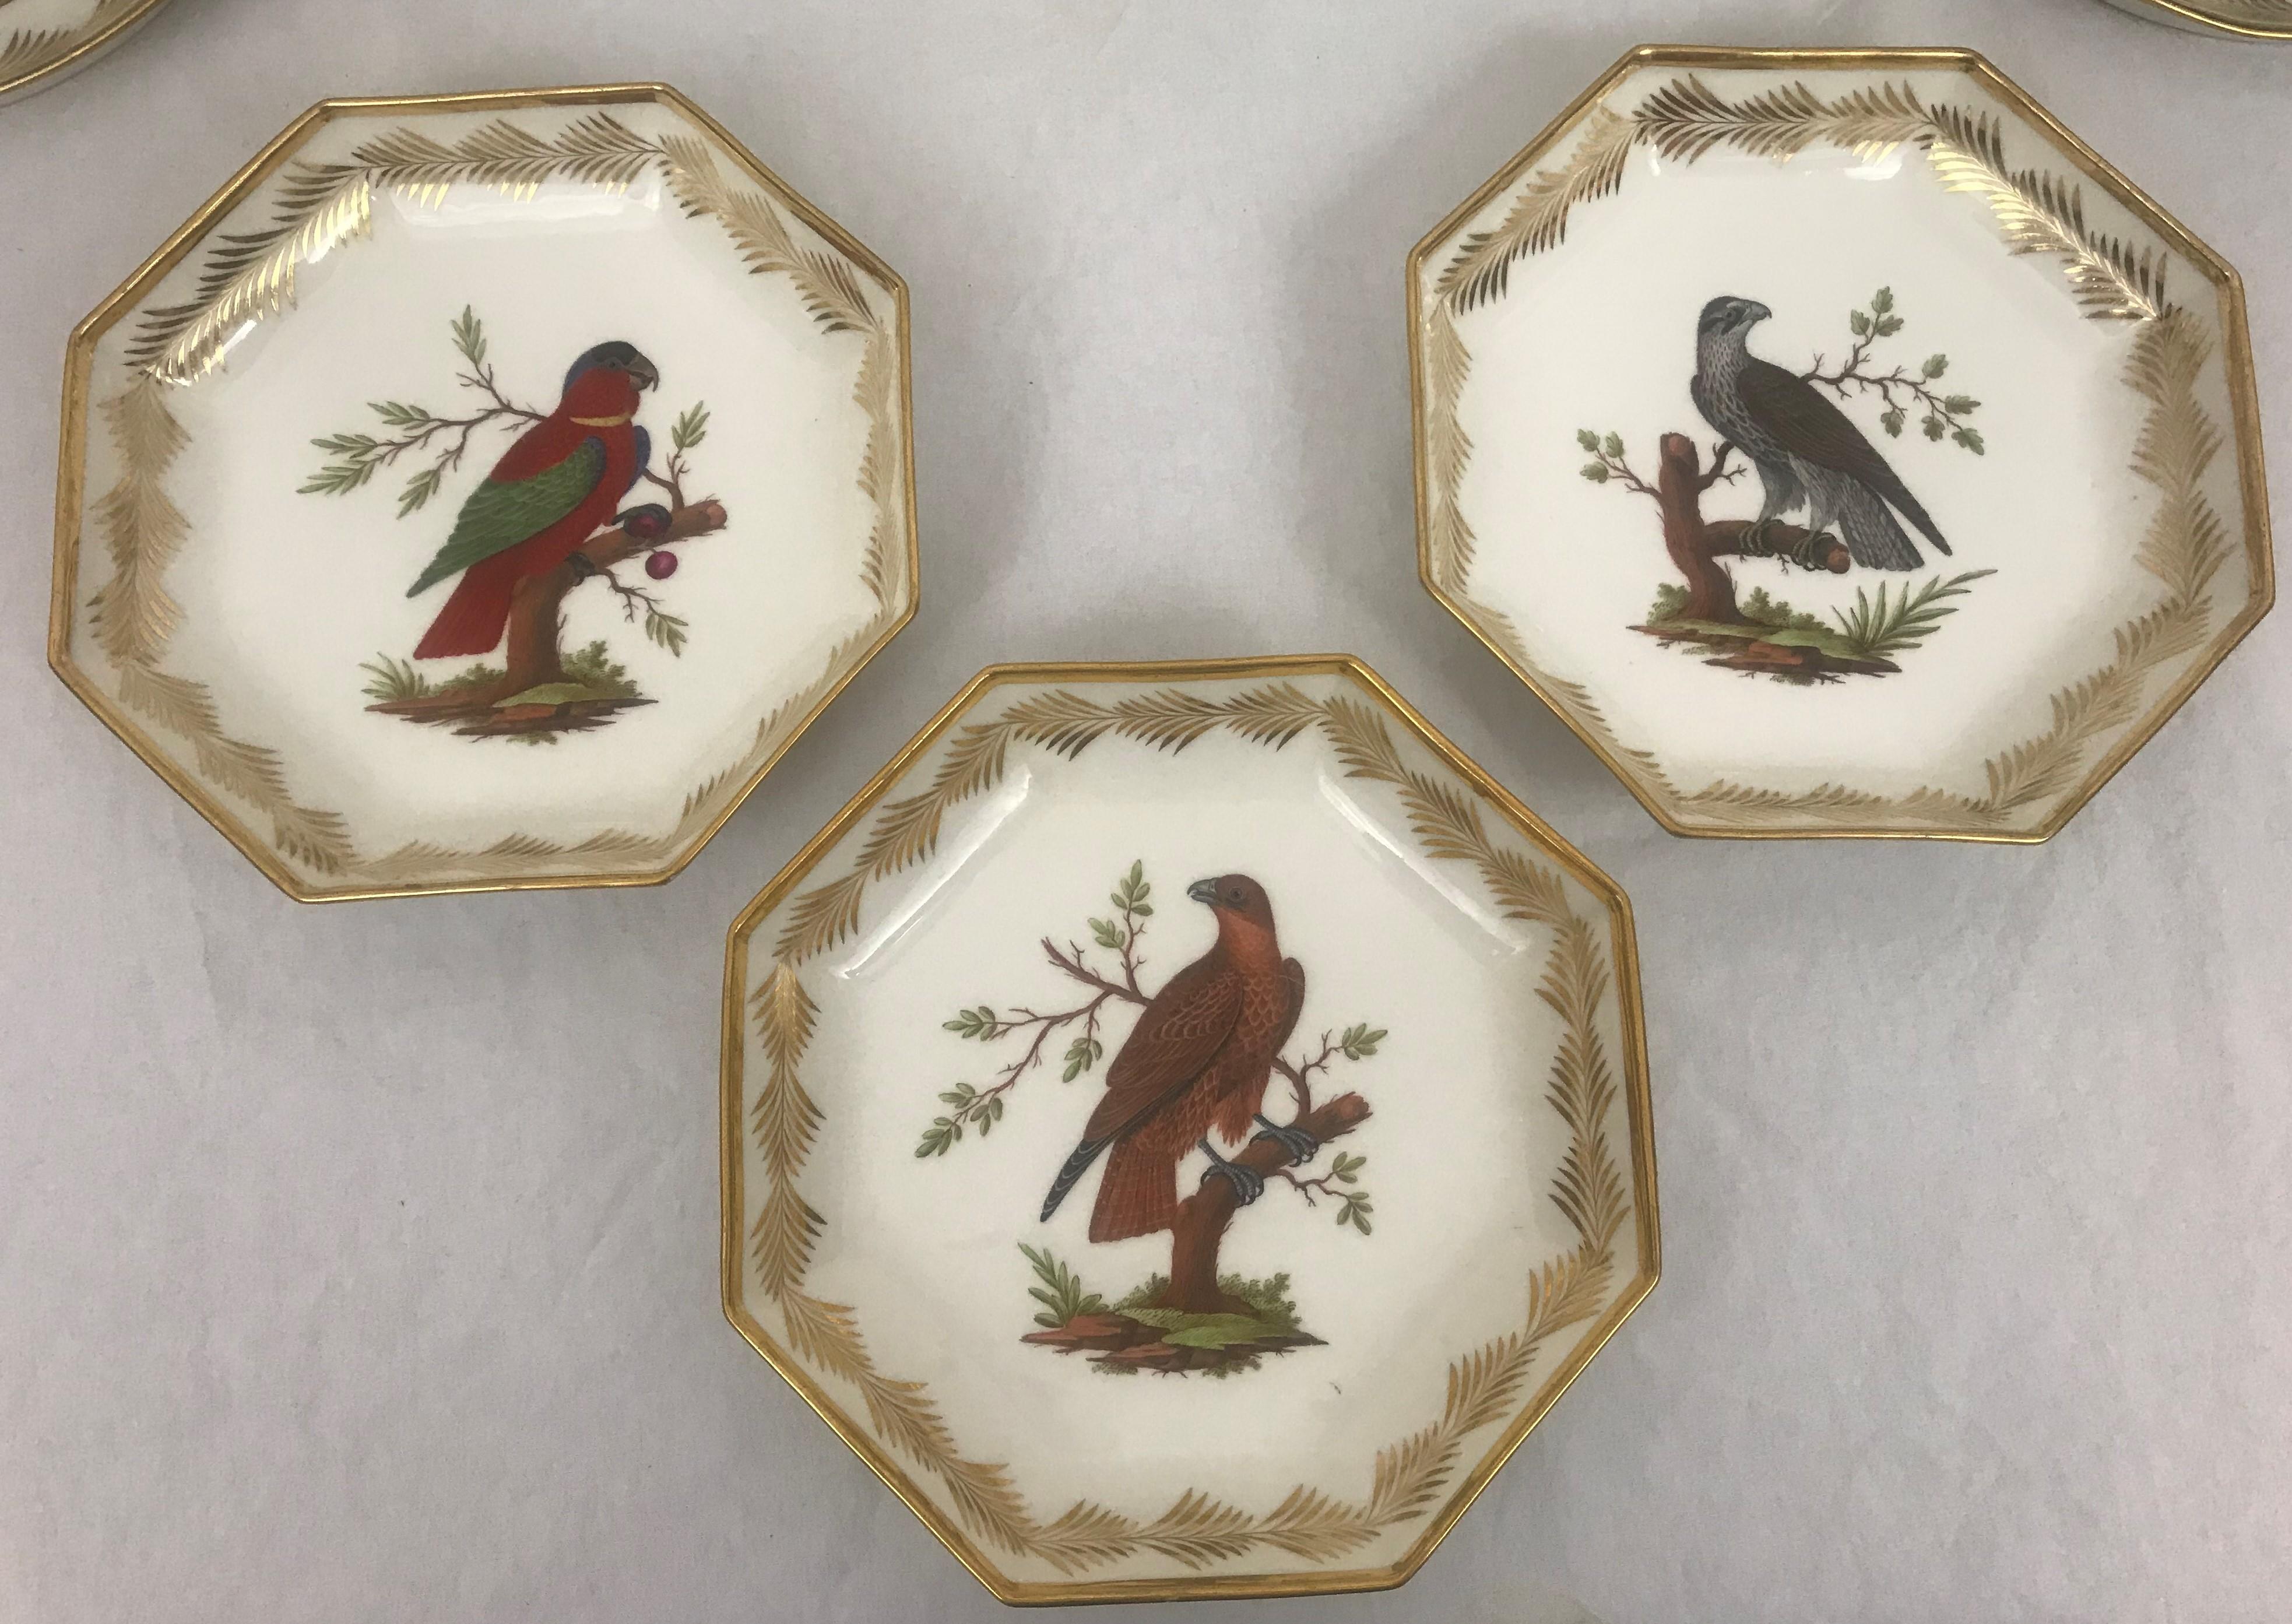 Lovely and highly important collection of French Old Paris porcelain by the Nast porcelain Factory, Paris. Producing porcelain from 1783- 1835. Each piece decorated with a bird identified in script on the back. Several pieces are signed Nast and two